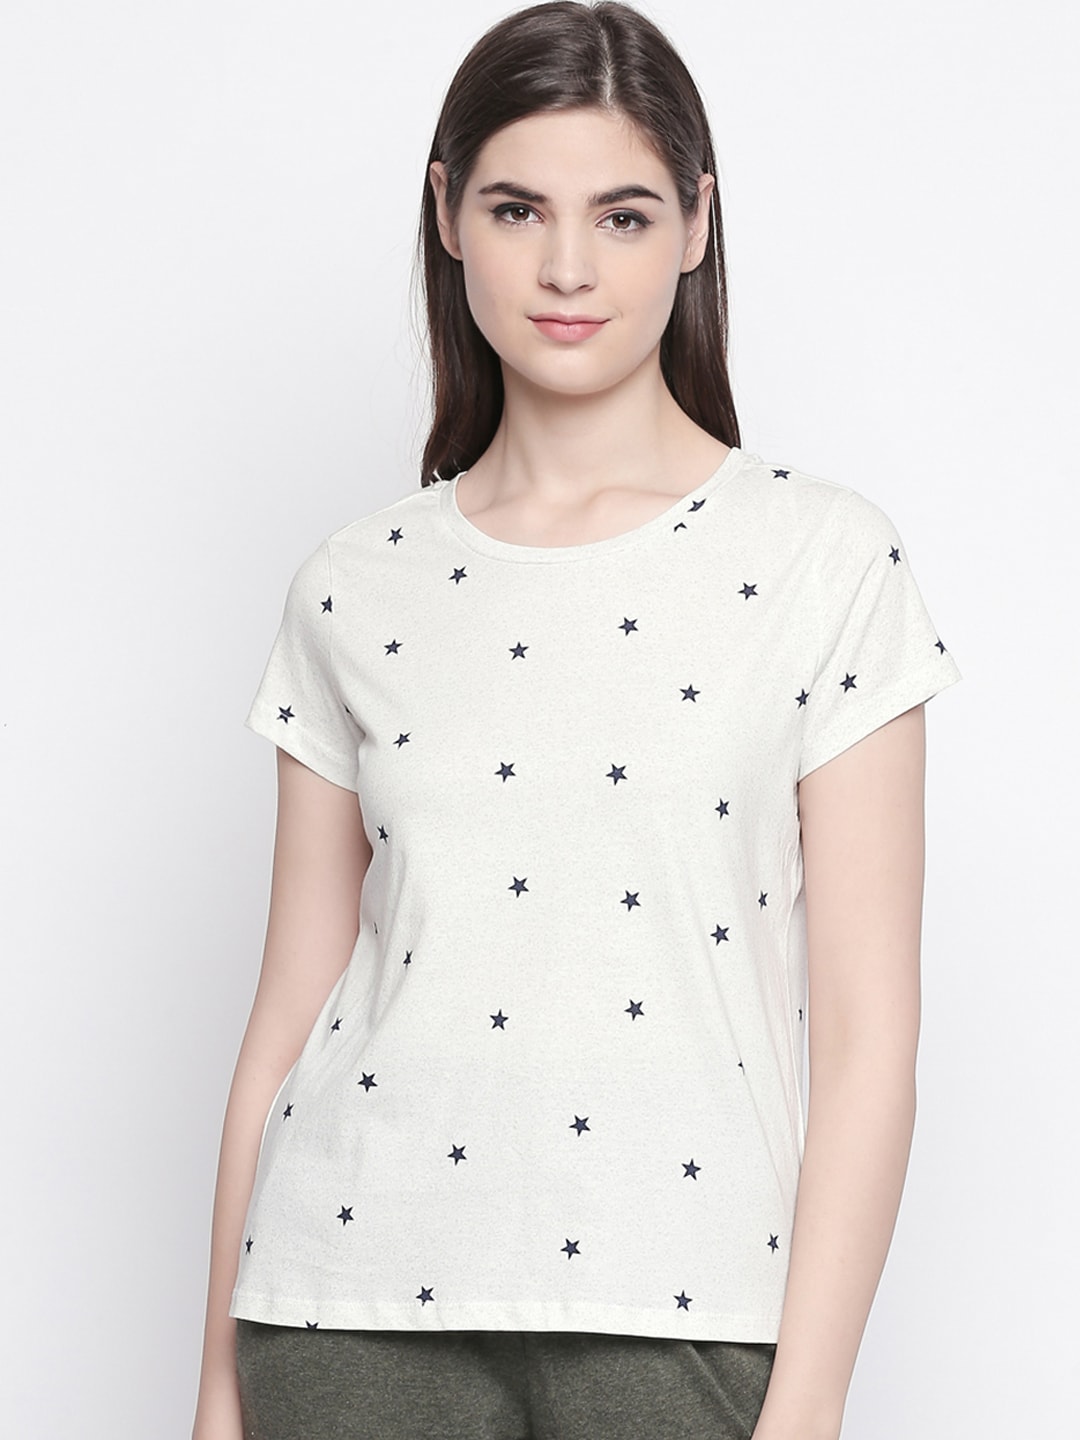 Dreamz by Pantaloons Women White Printed Pure Cotton Lounge tshirt Price in India